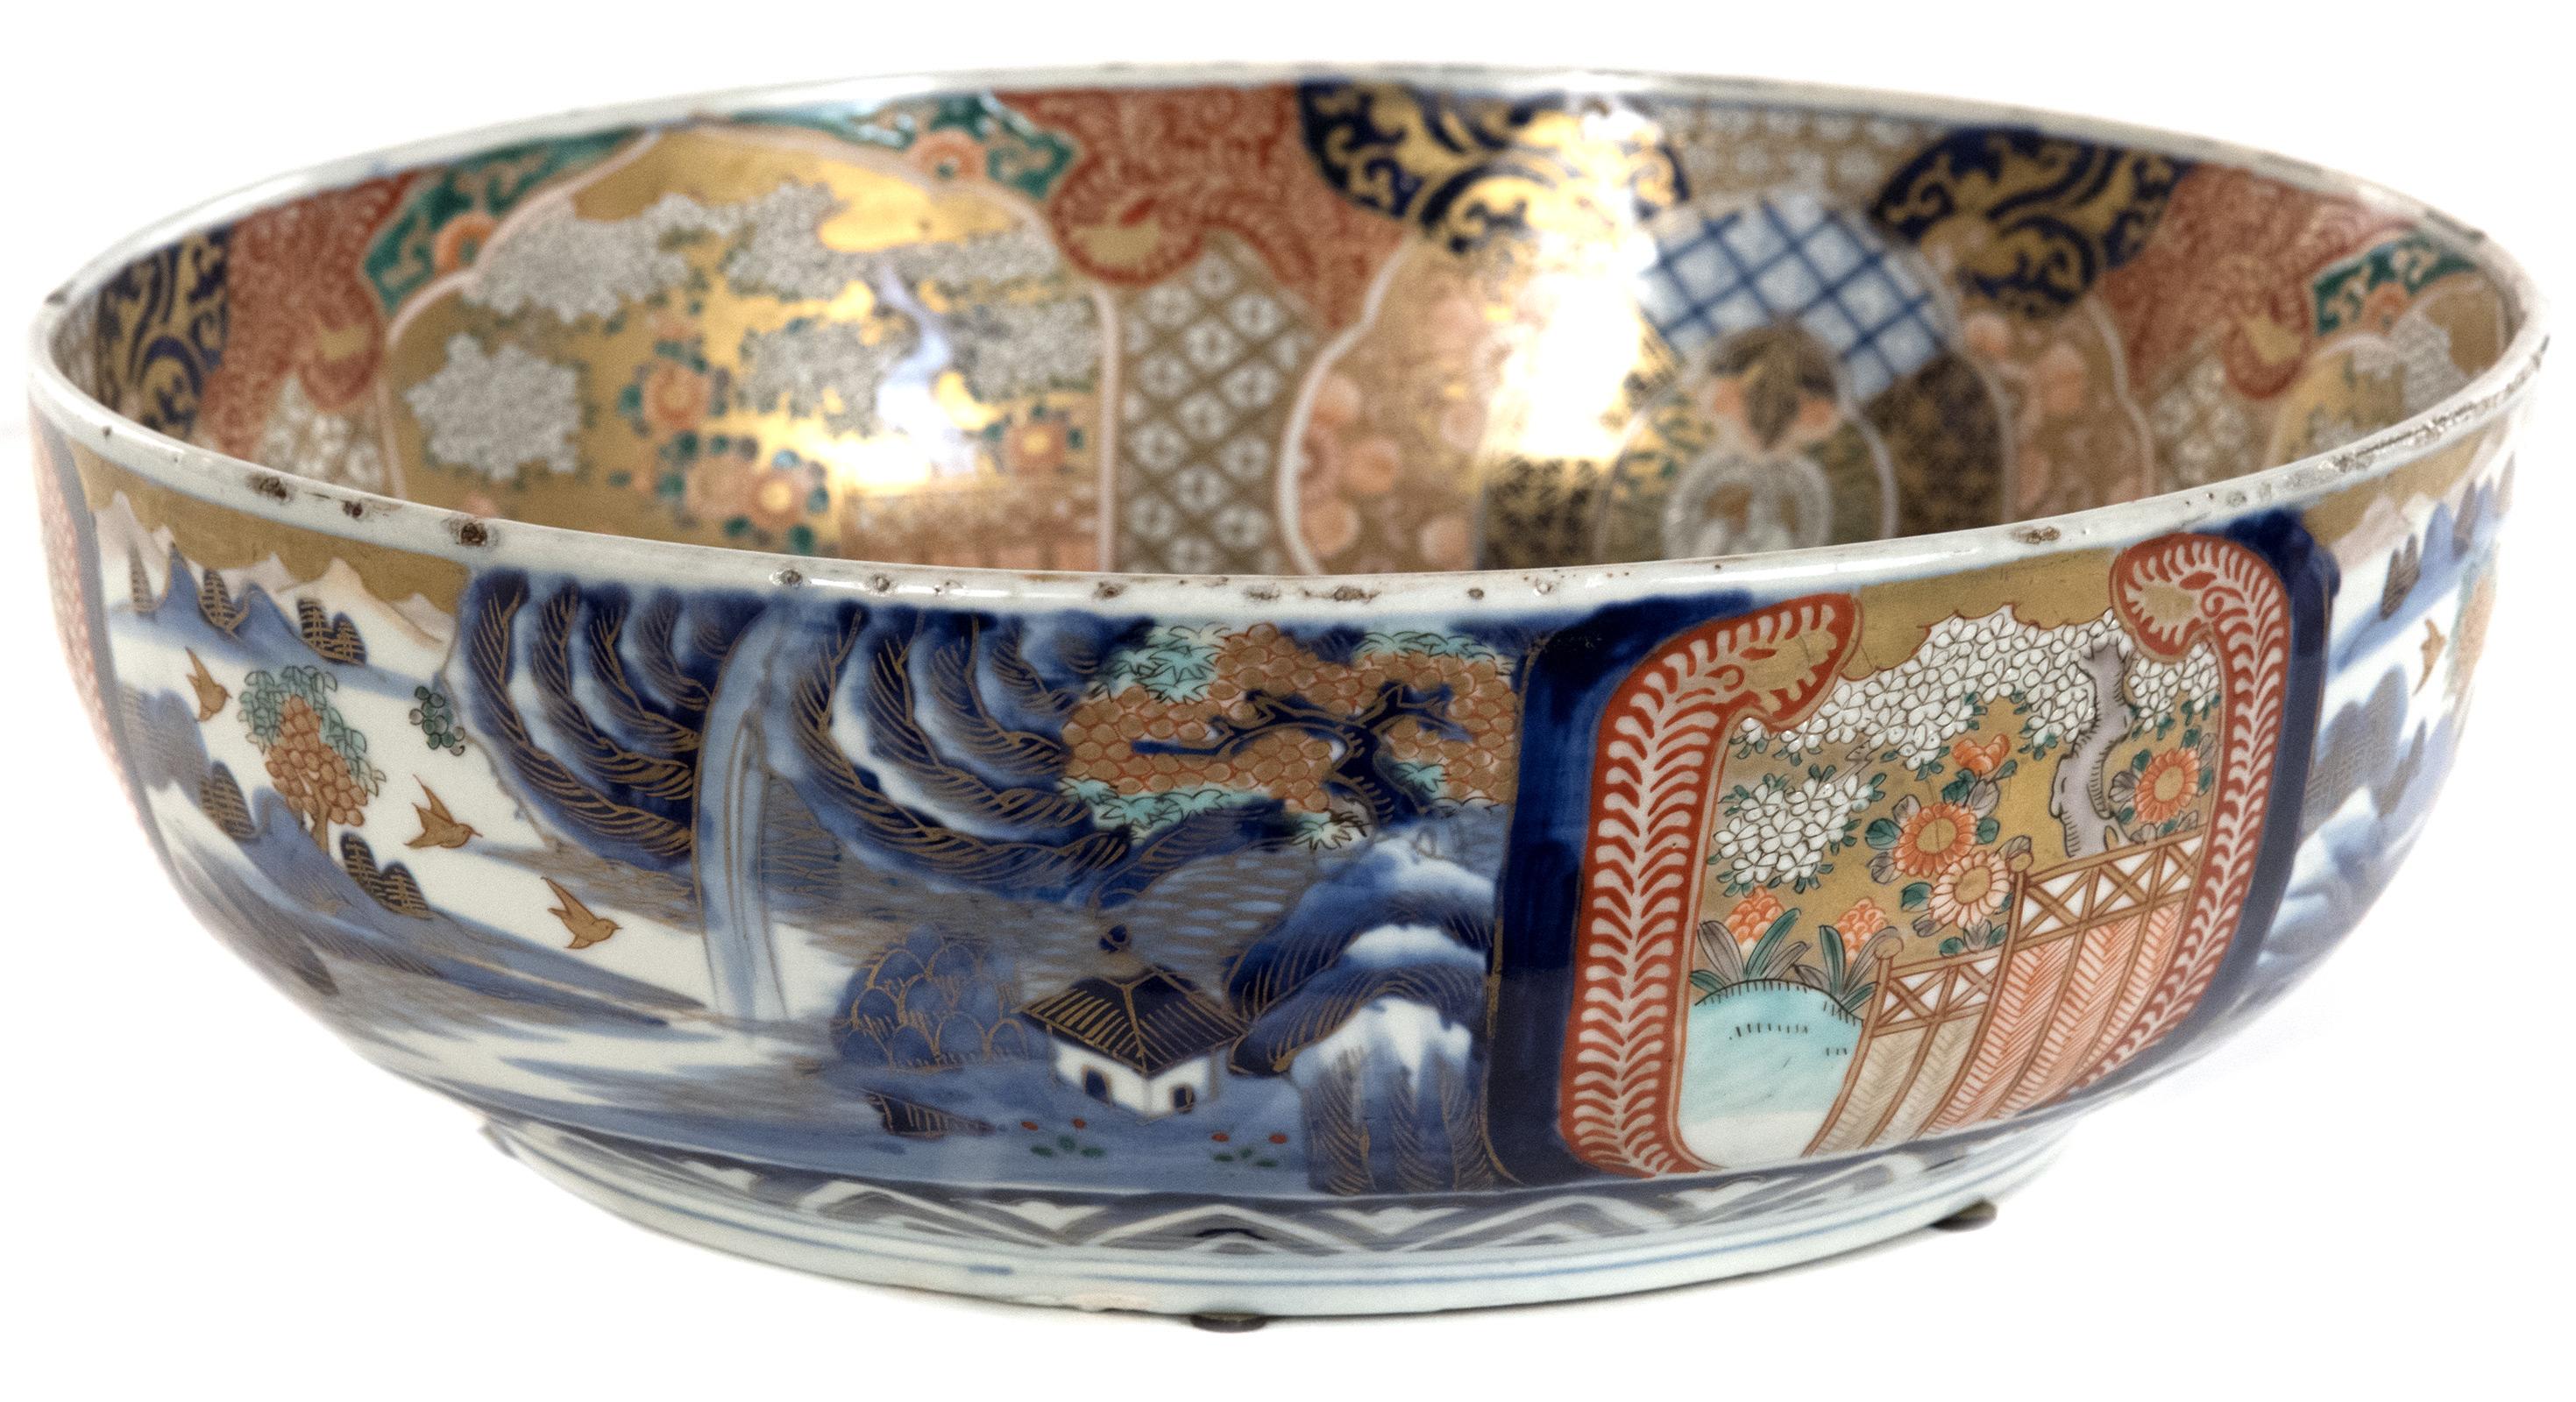 An elaborately decorated Japanese bowl decorated all over in the Imari style that is enhanced with hand-painted gold detailing. The exterior of the bowl is painted with landscapes, with a banded view of a screen and blooming tree, which is copied to